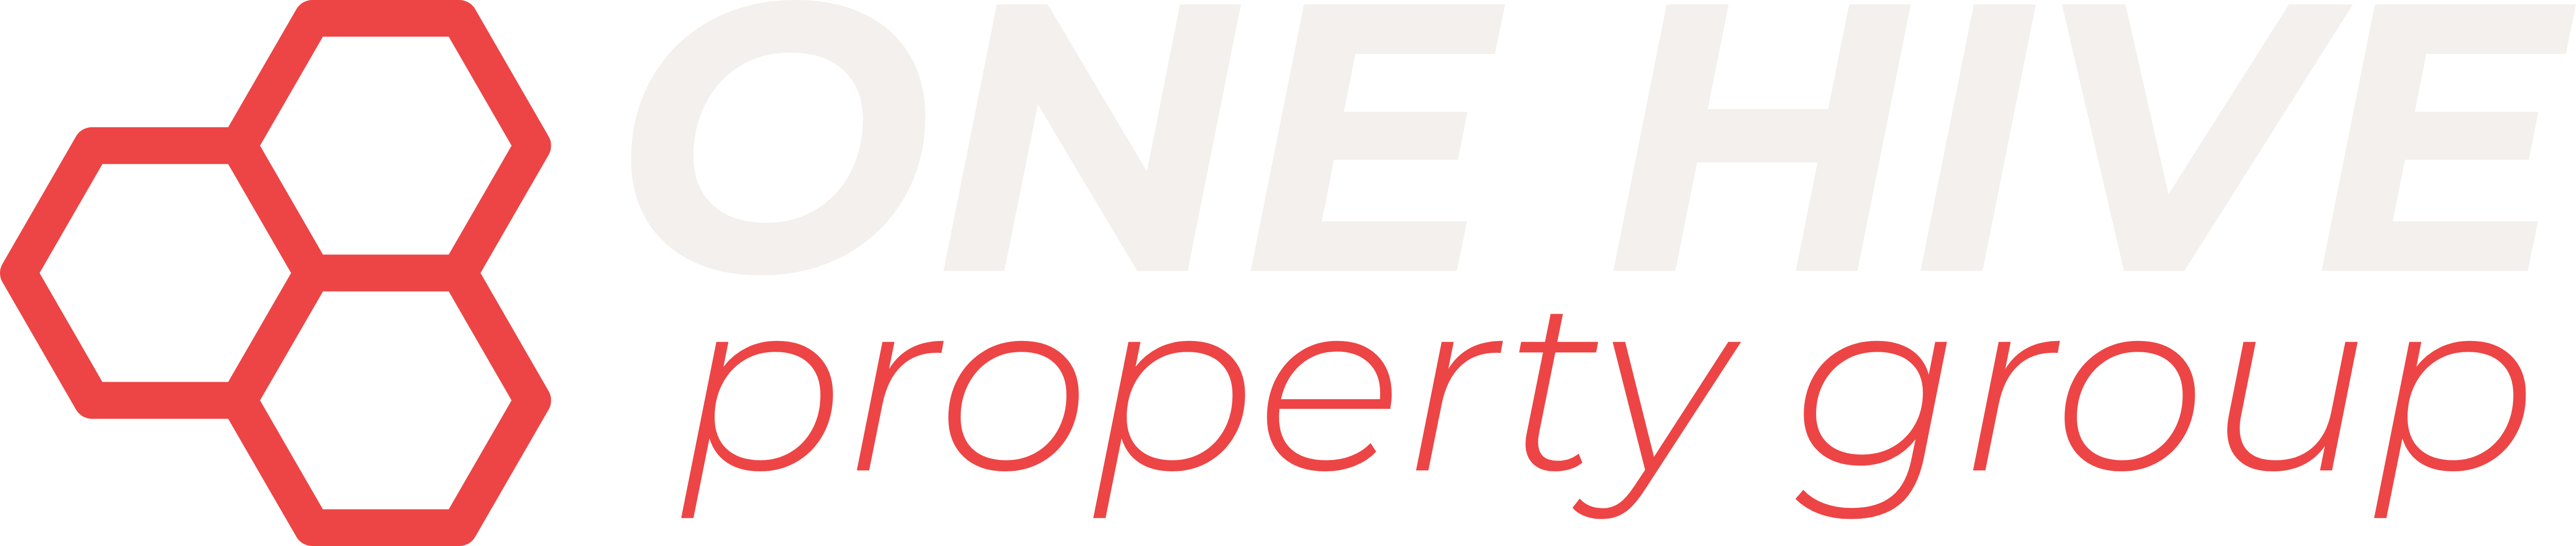 One Hive Property Group